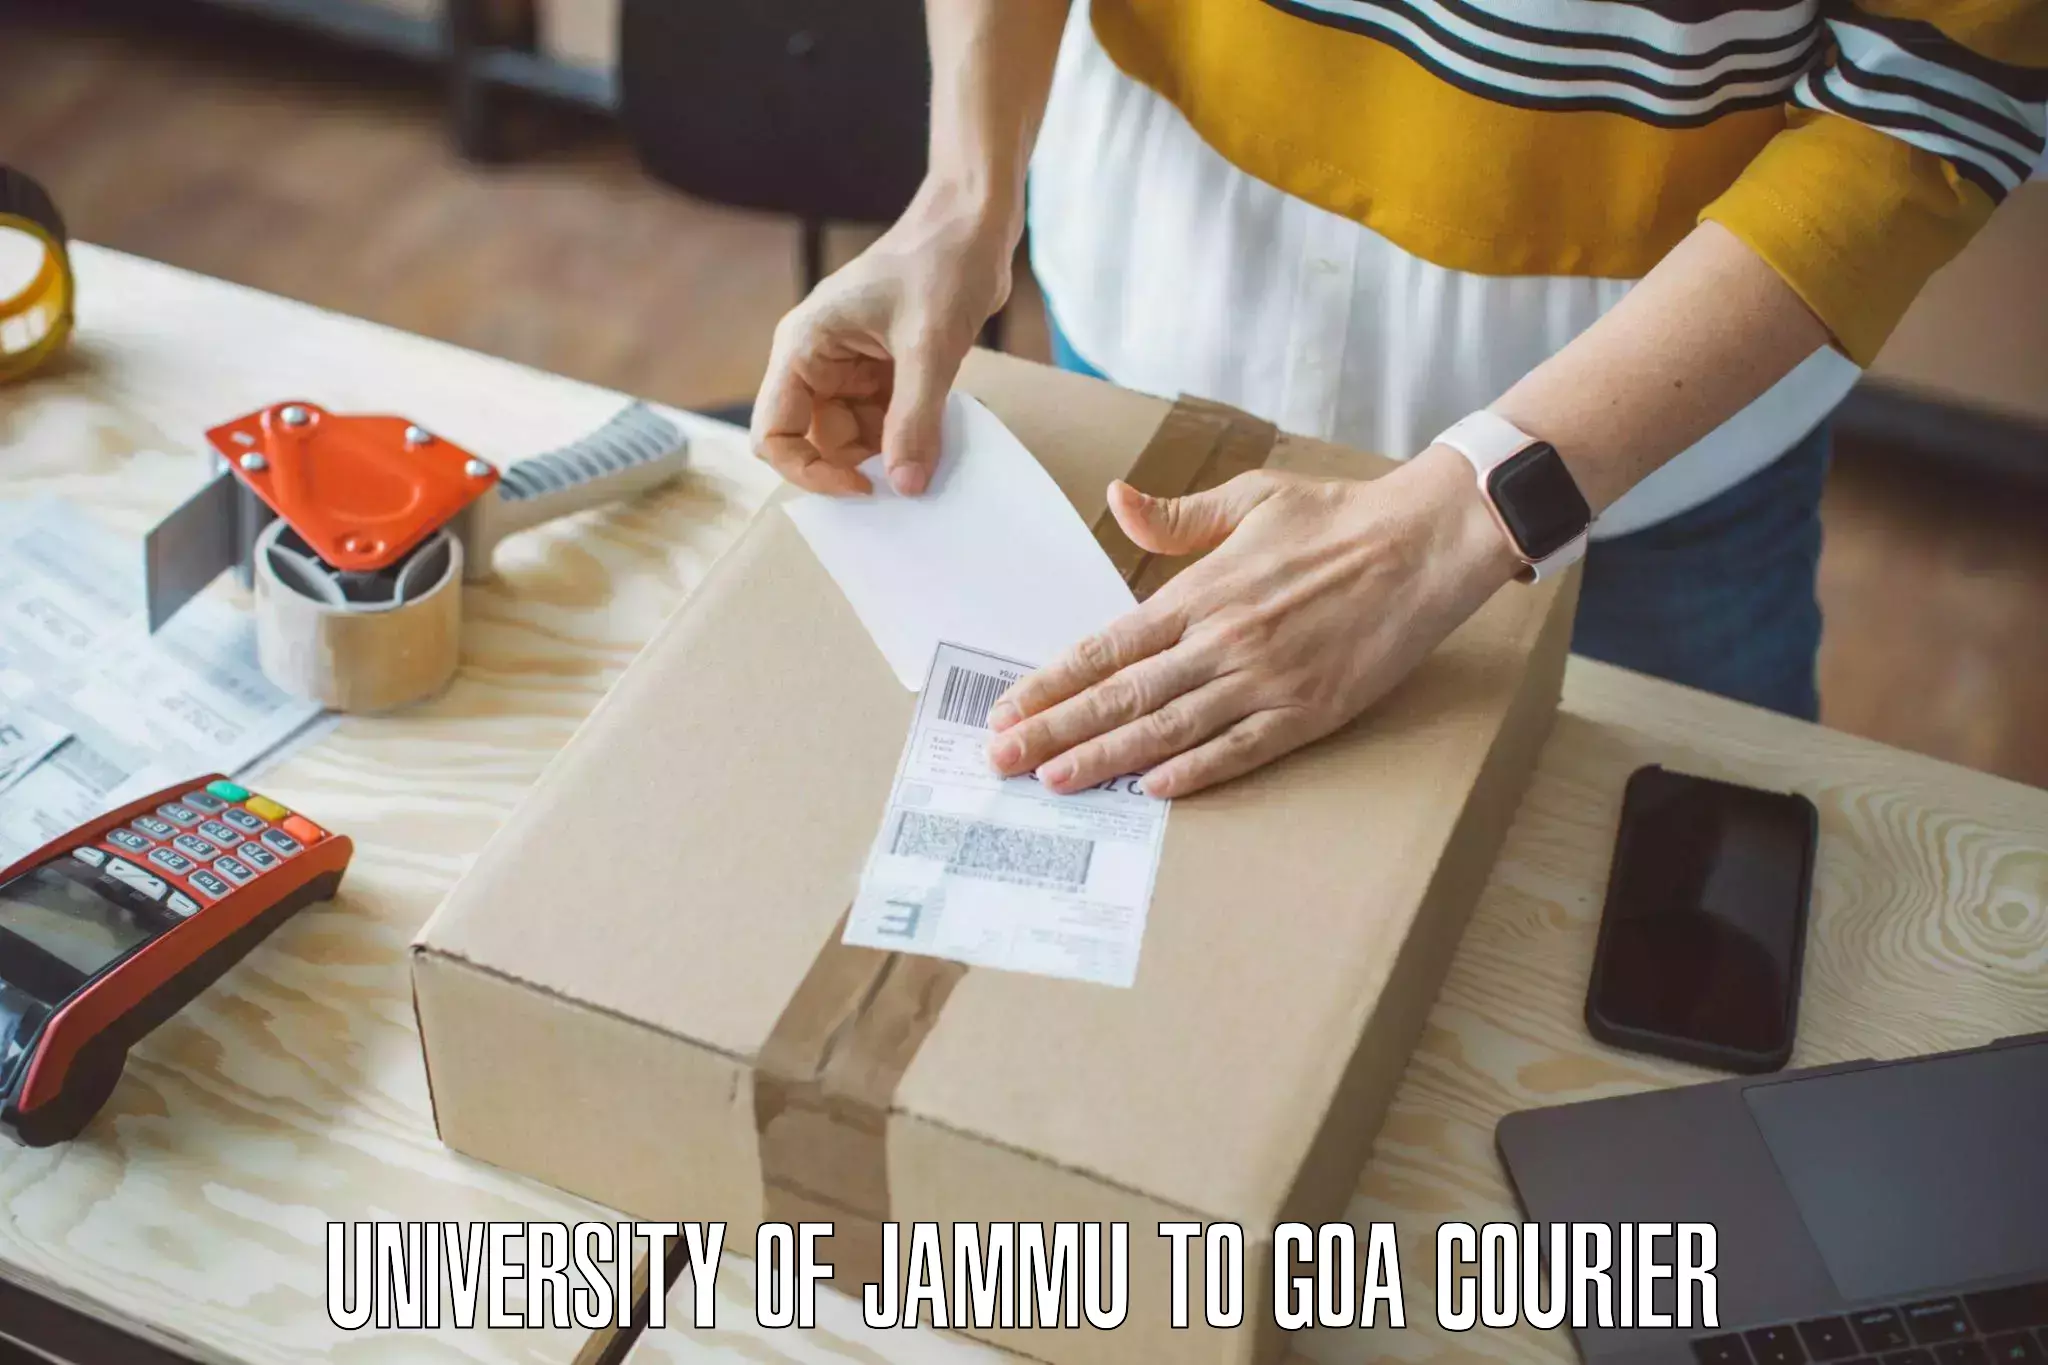 Furniture relocation services in University of Jammu to Panaji